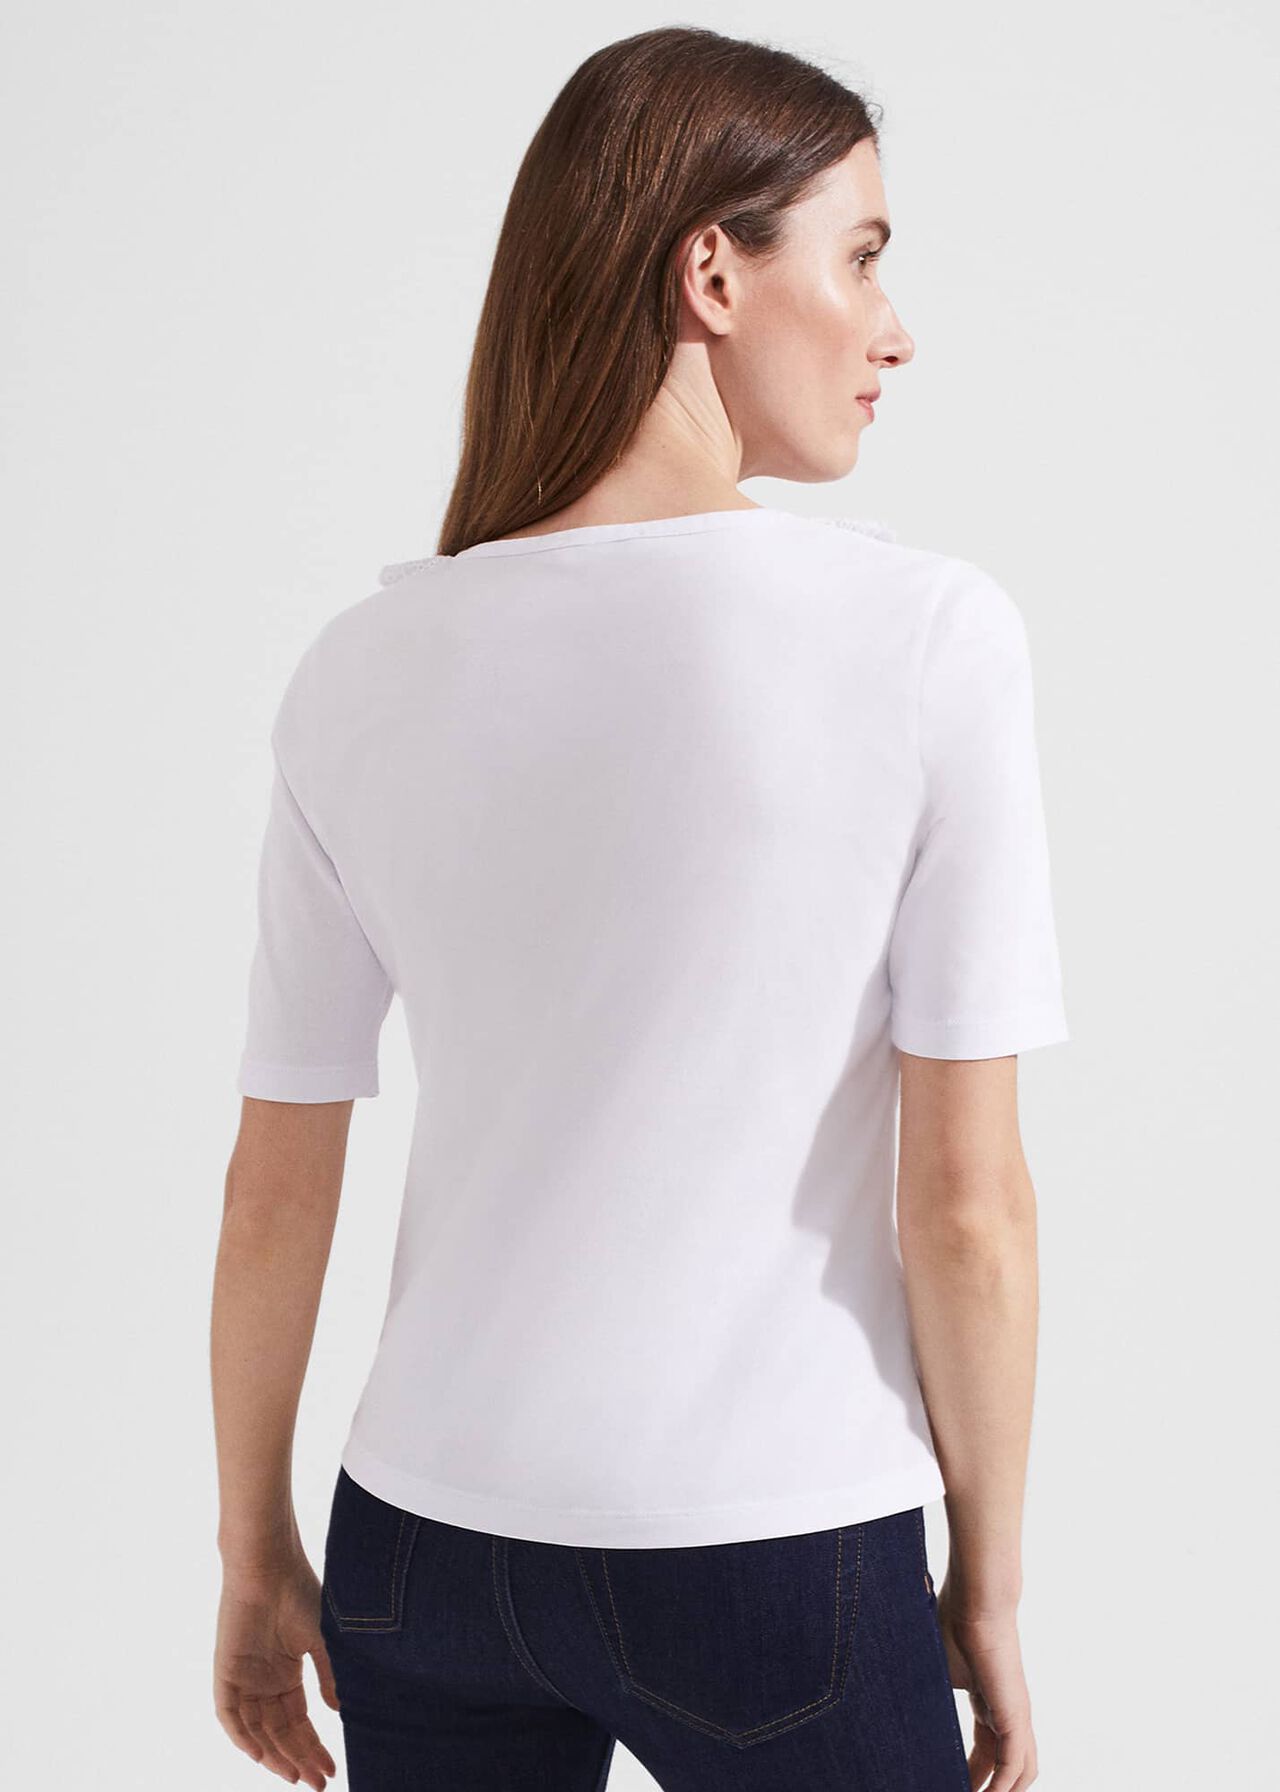 Demi Broderie Top, White, hi-res